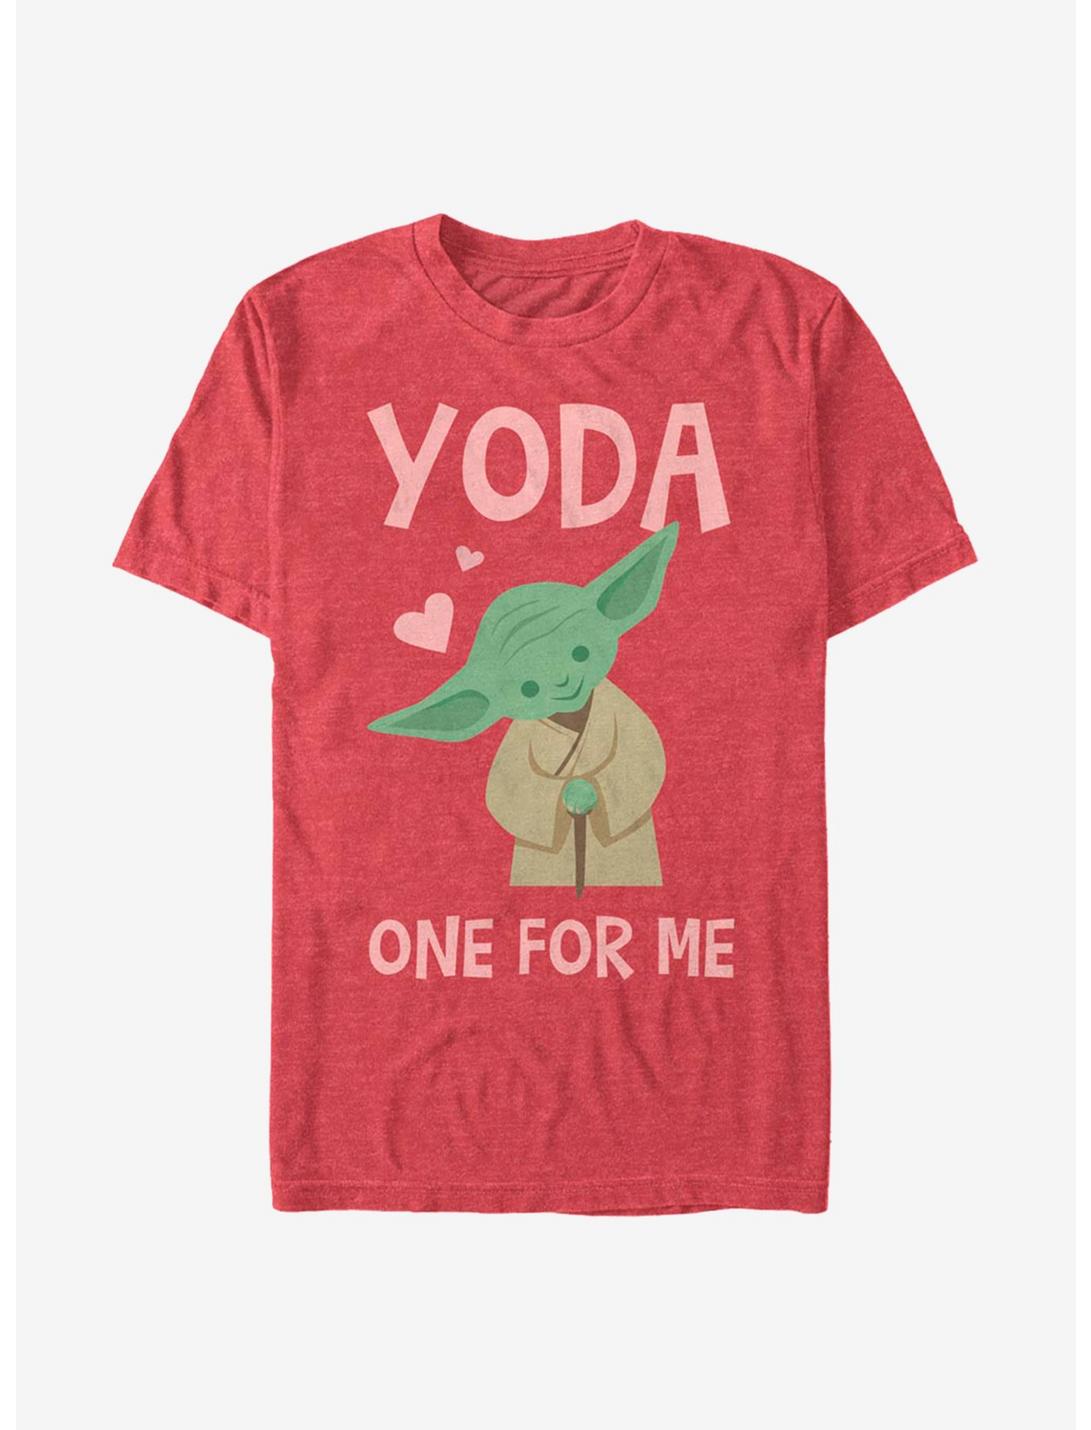 Star Wars Yoda One For Me T-Shirt, RED HTR, hi-res